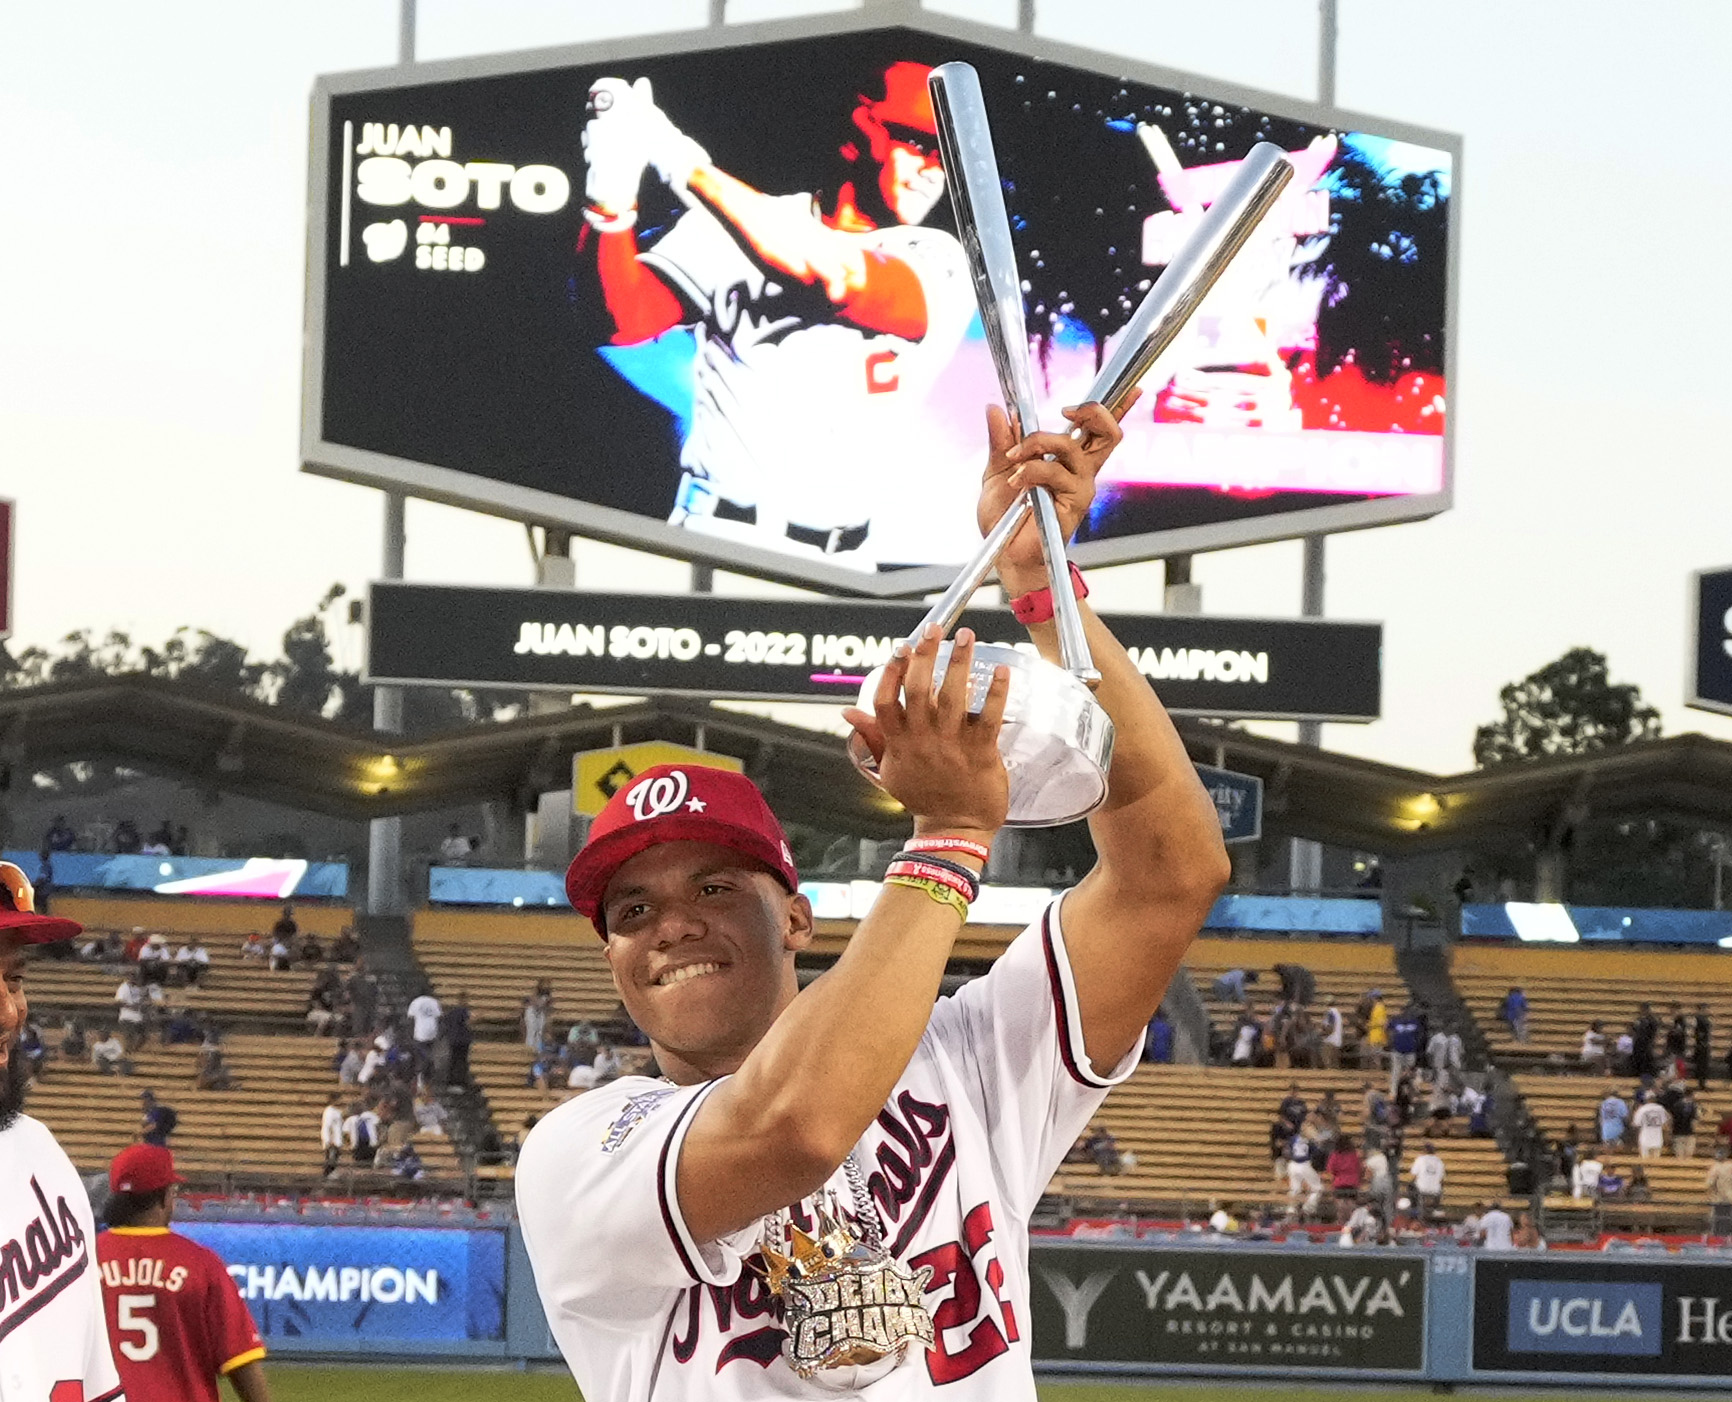 Juan Soto of the Washington Nationals wins the All-Star Home Run Derby at Dodger Stadium in Los Angeles.